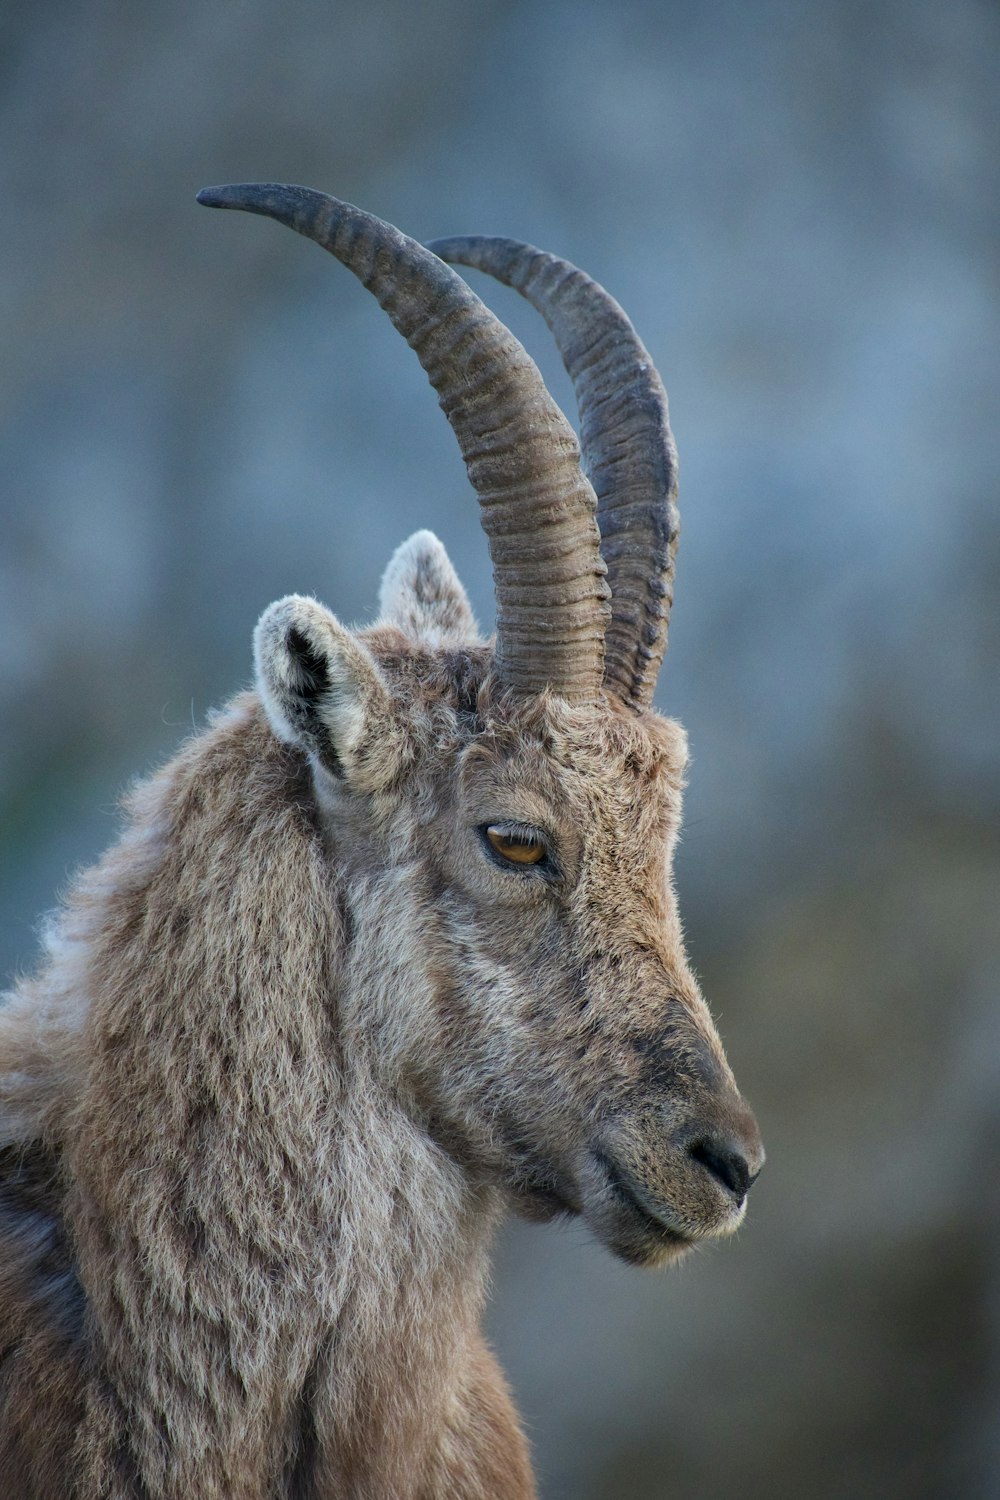 Brown ram in close up photography photo – Free Animal Image on Unsplash